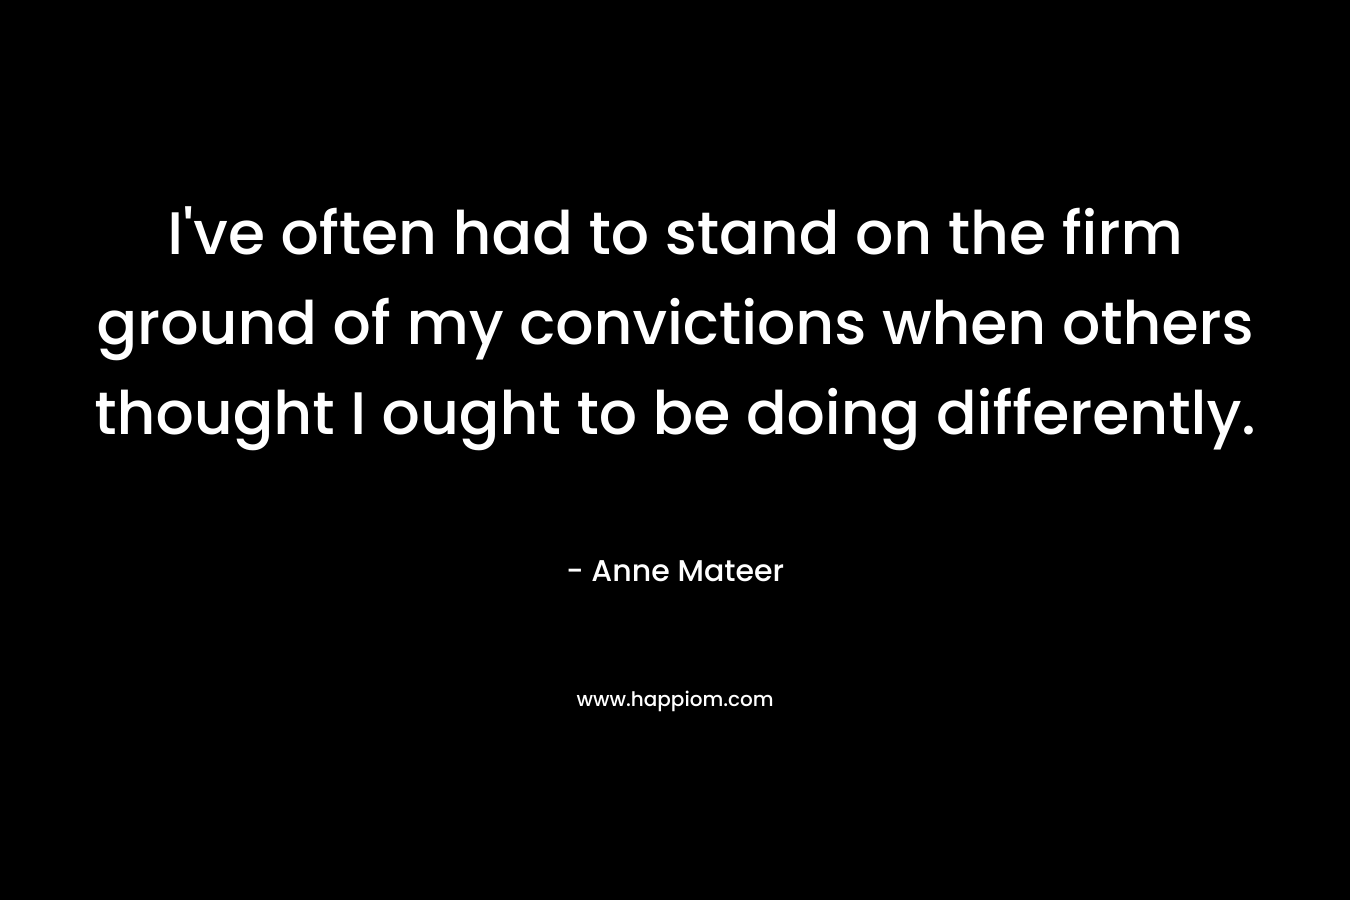 I’ve often had to stand on the firm ground of my convictions when others thought I ought to be doing differently. – Anne Mateer